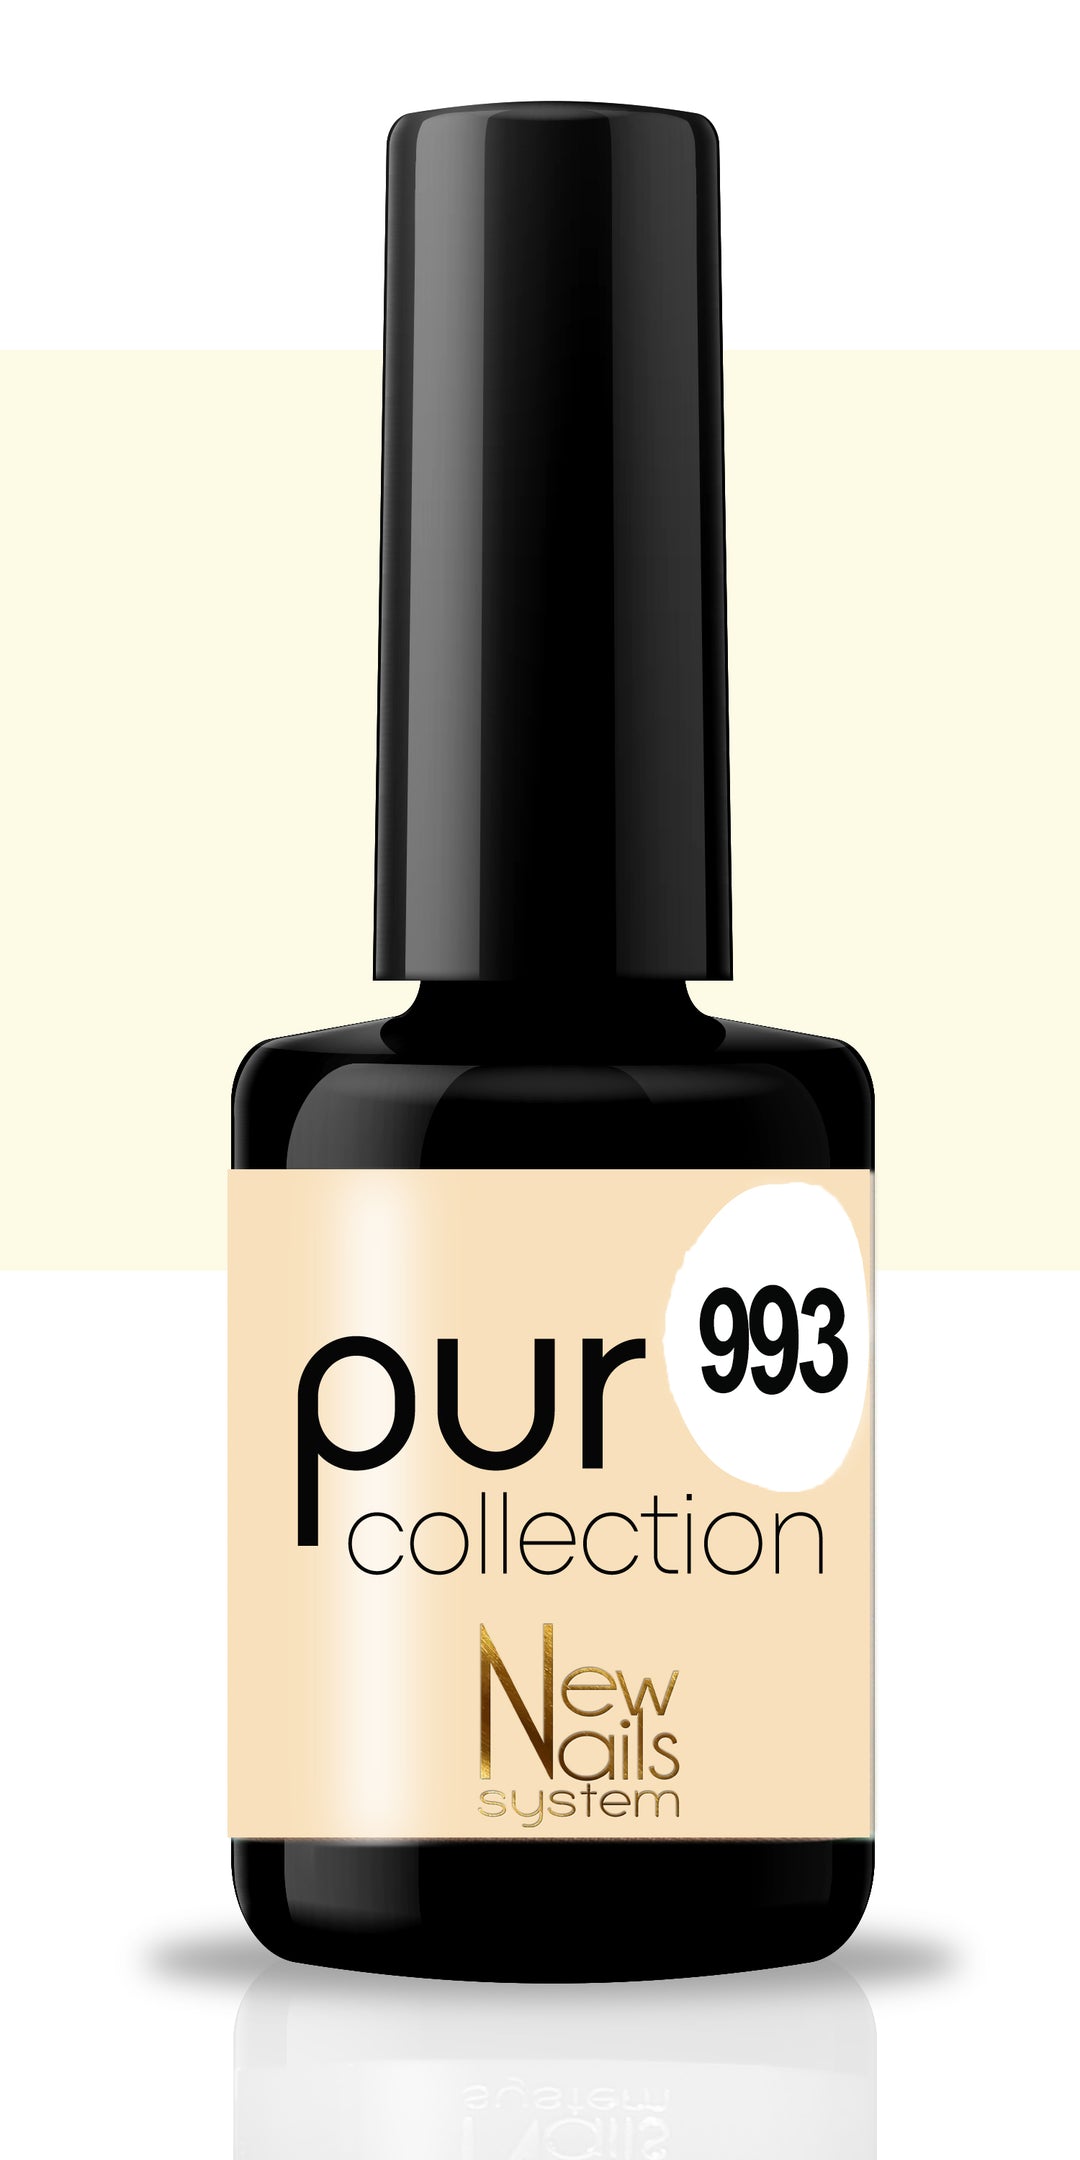 Puro collection 993 semi-permanent Sweet Pastel color 5ml